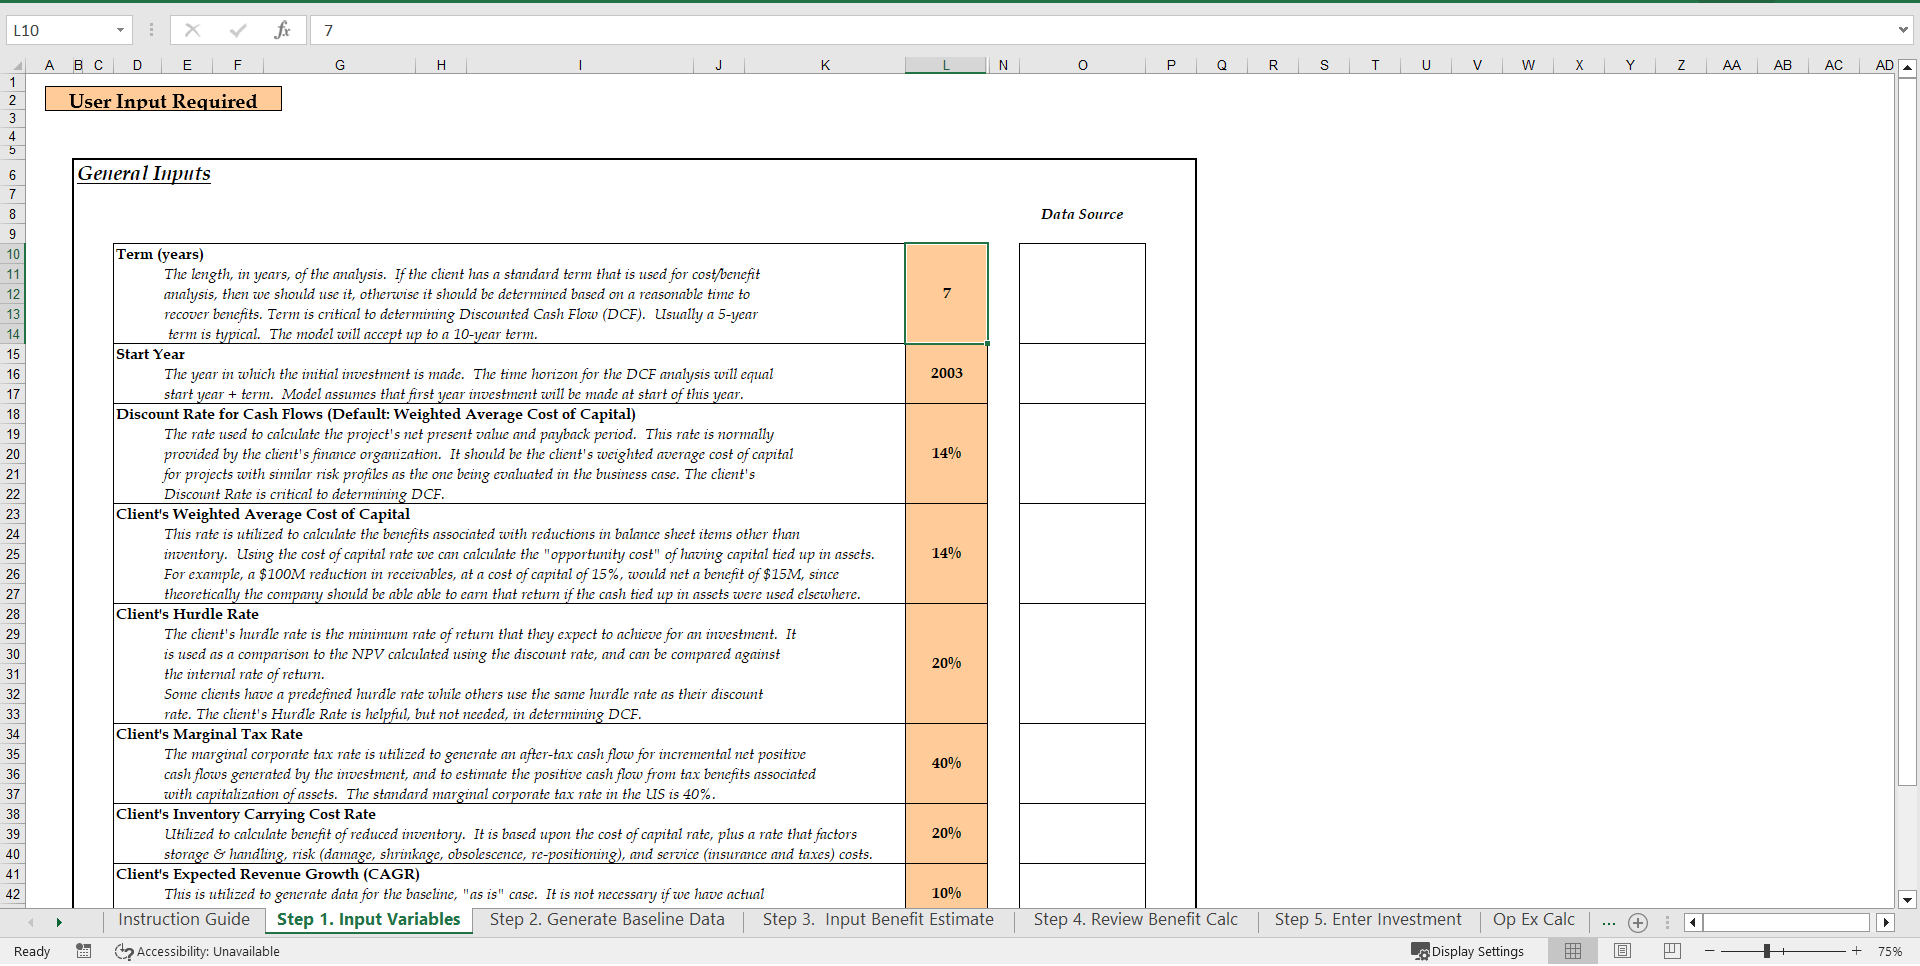 Business Case Template Excel from flevy.com